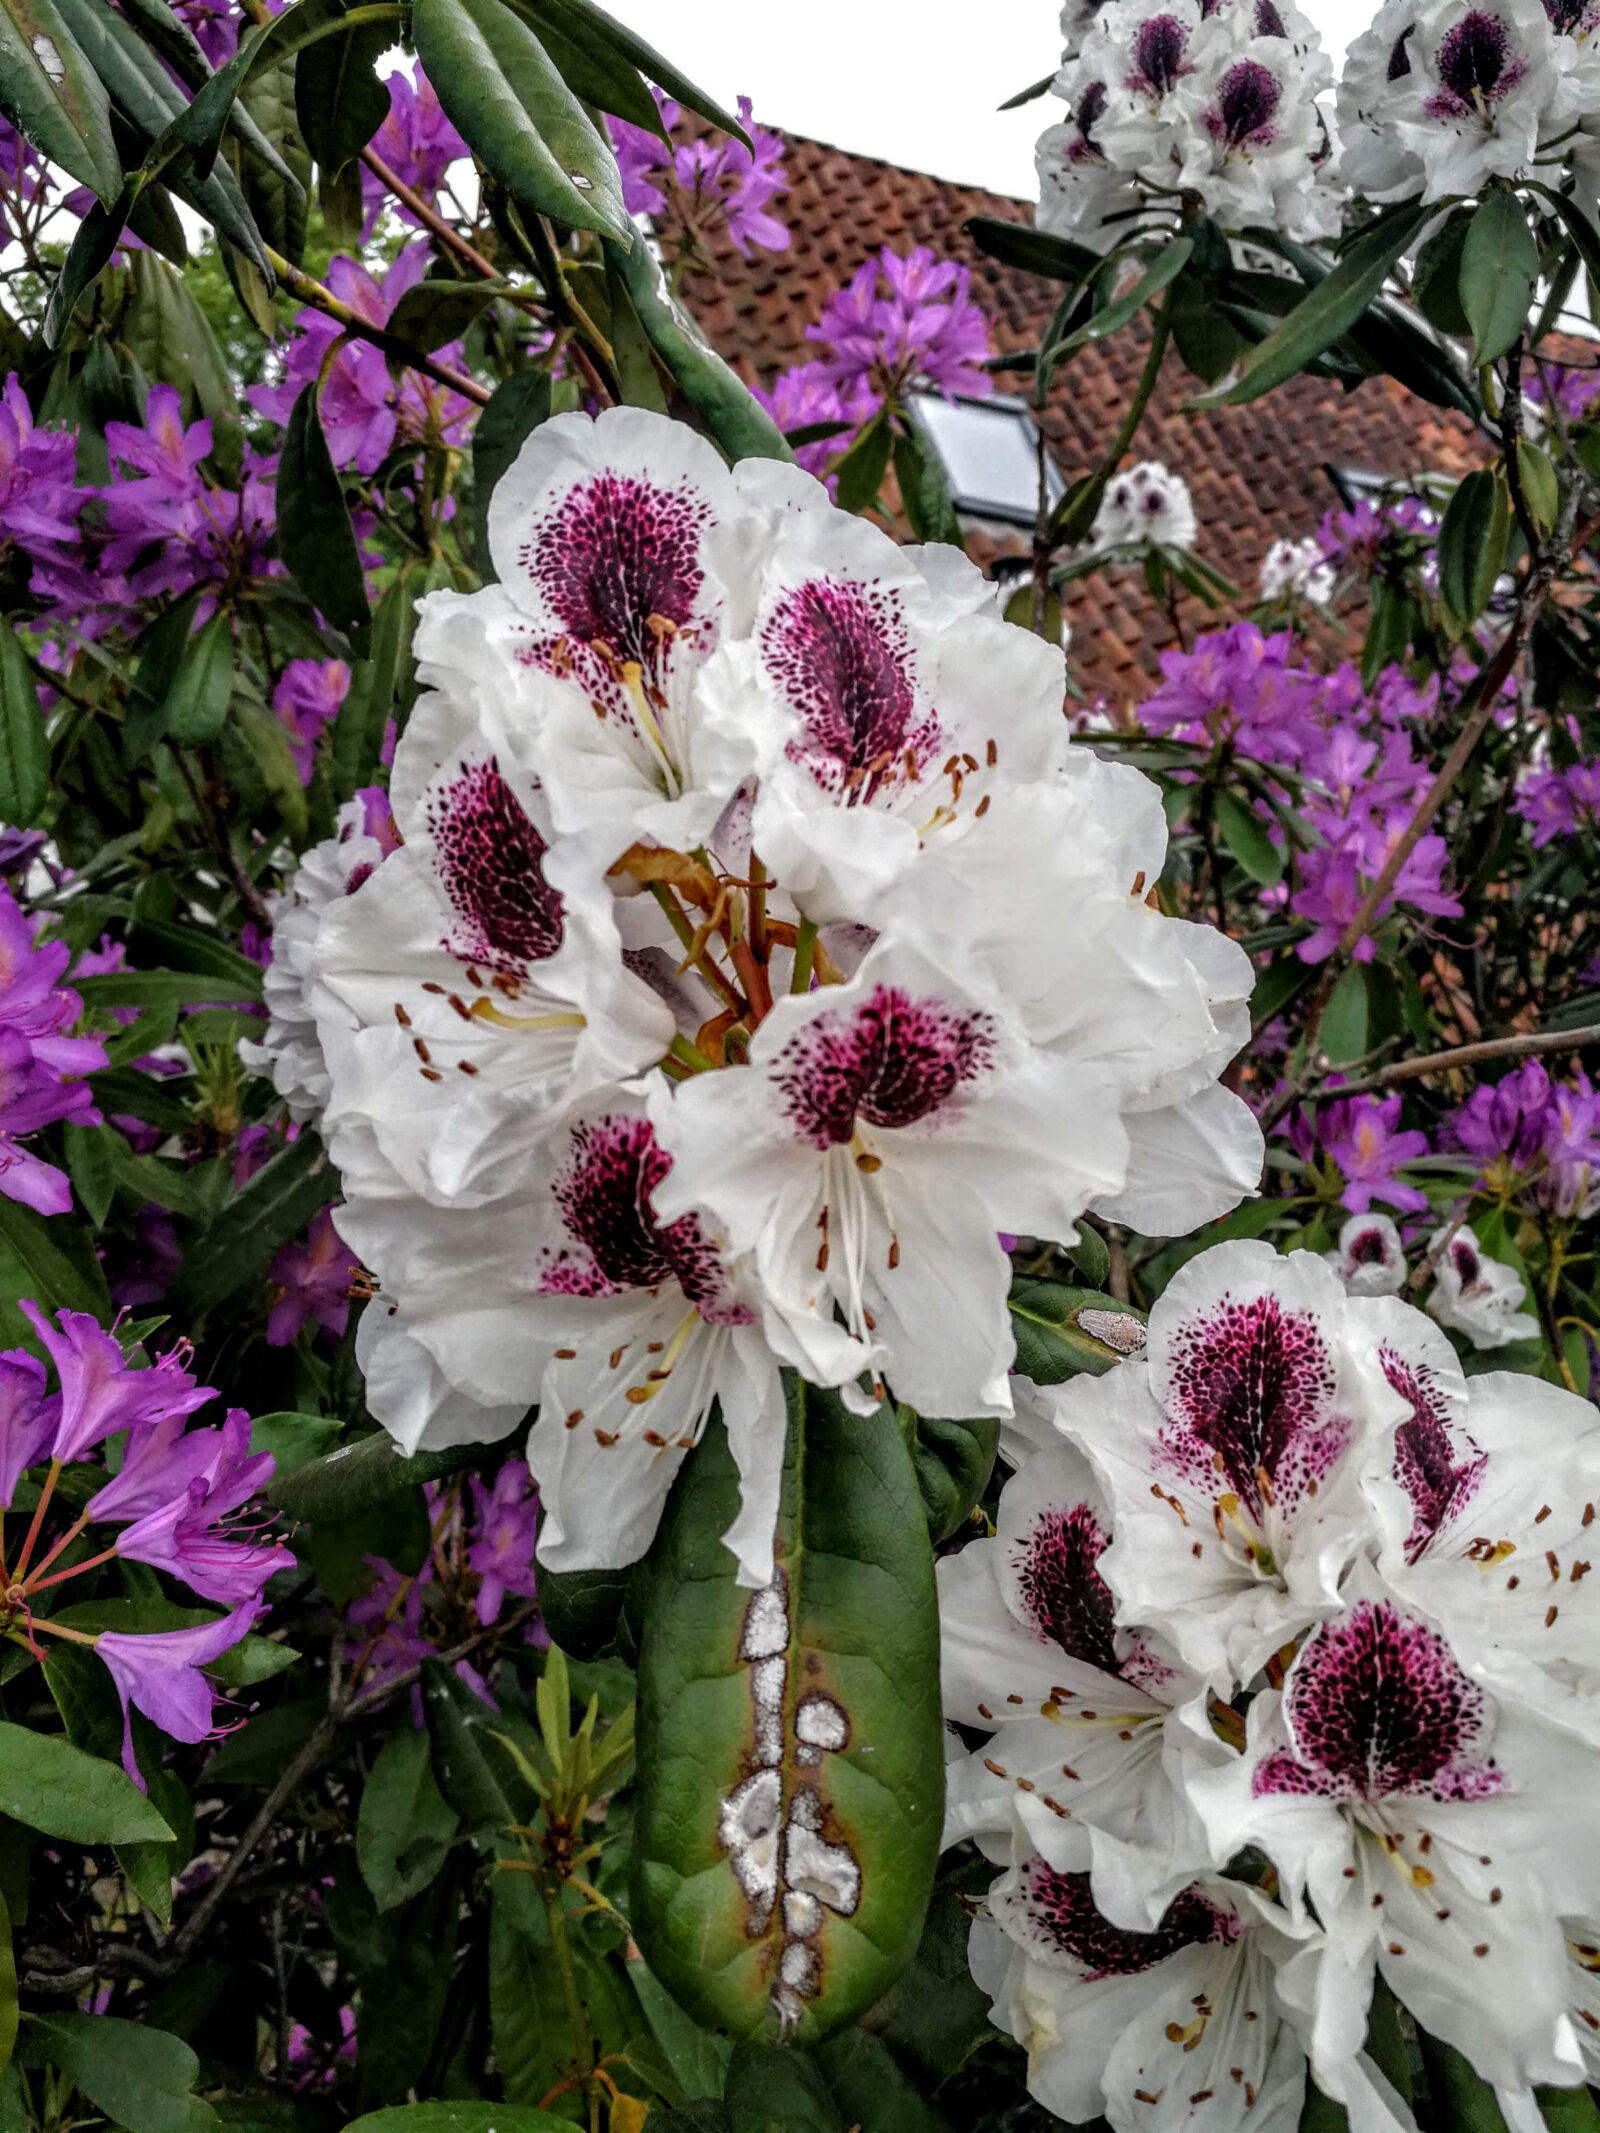 HUAWEI Mate 9 sample photo. Rhododendron, purple, nature photography